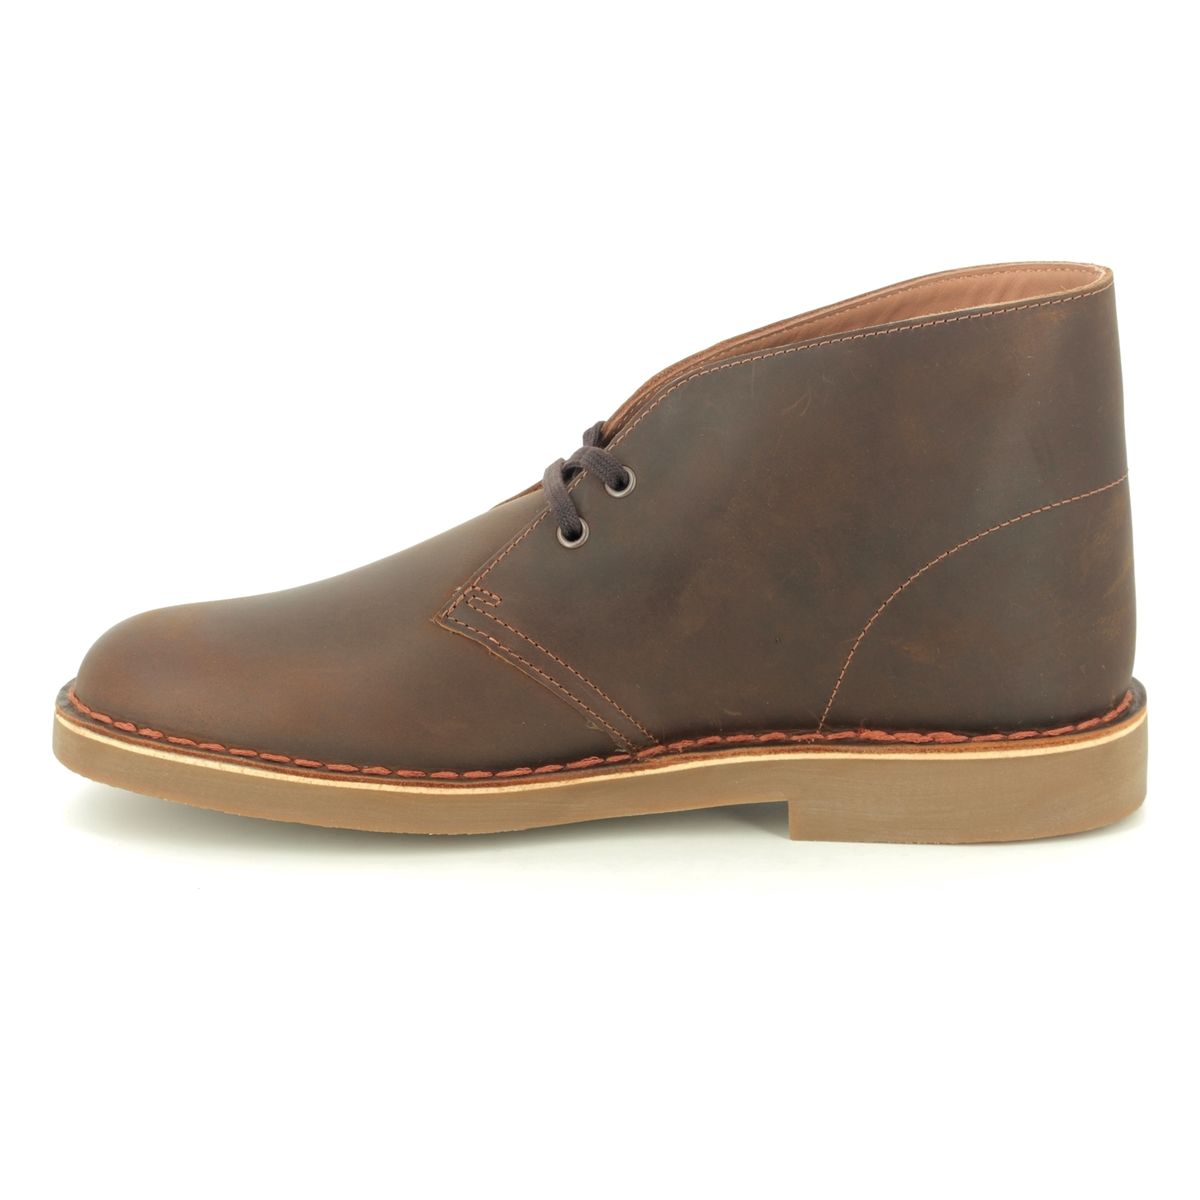 hemmeligt dialog holdall Clarks Desert Boot 2 G Fit Brown waxy leather Chukka Boots